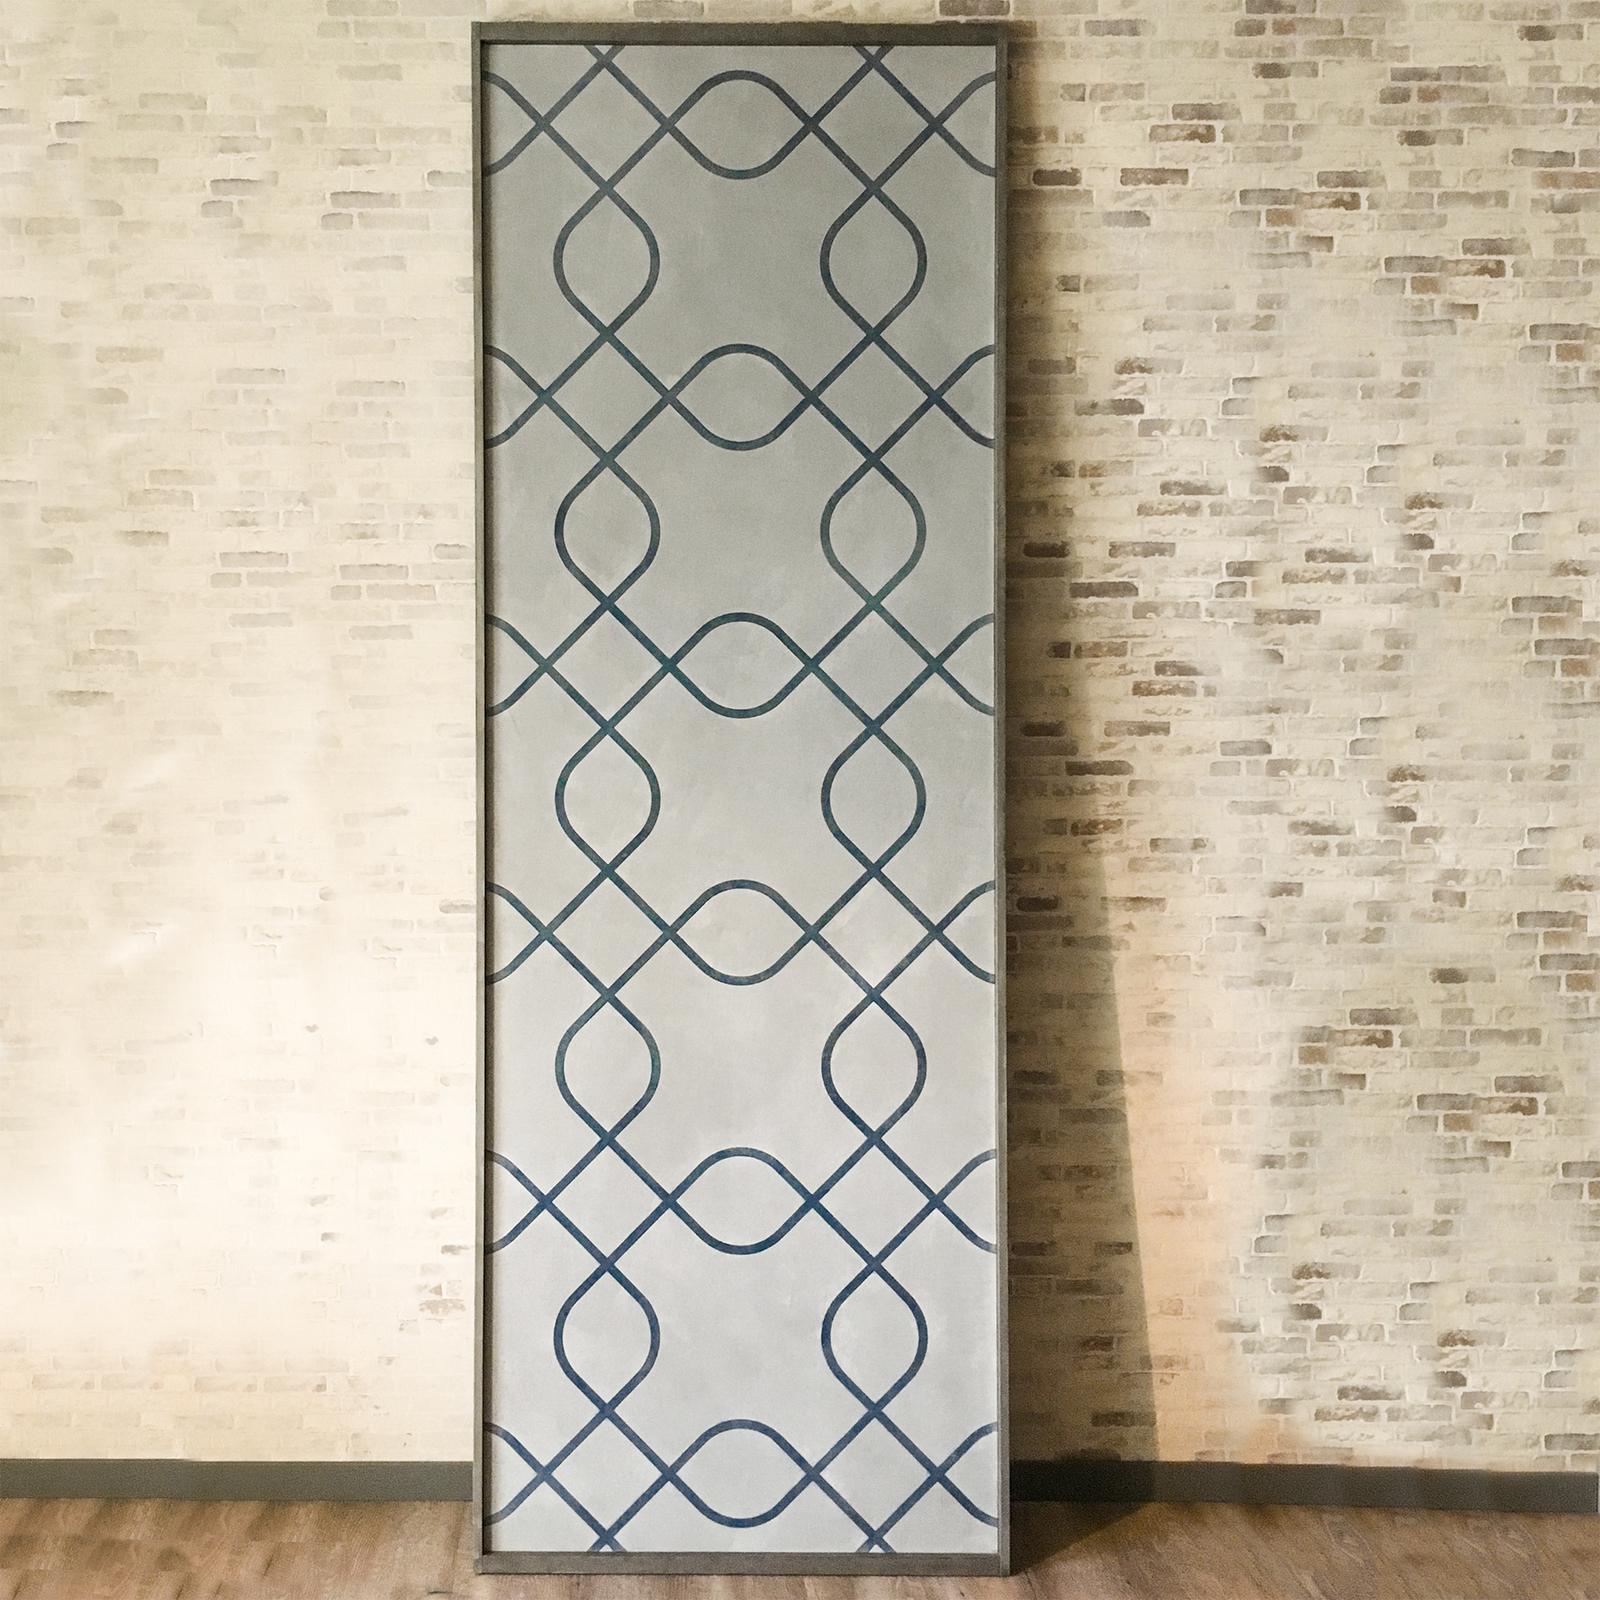 This stunning screen is a versatile piece to embellish a wall that can also be used to separate two areas of a room. Adding an exquisite and unique texture and decorative pattern to a contemporary interior, this piece rests on an anodized aluminum